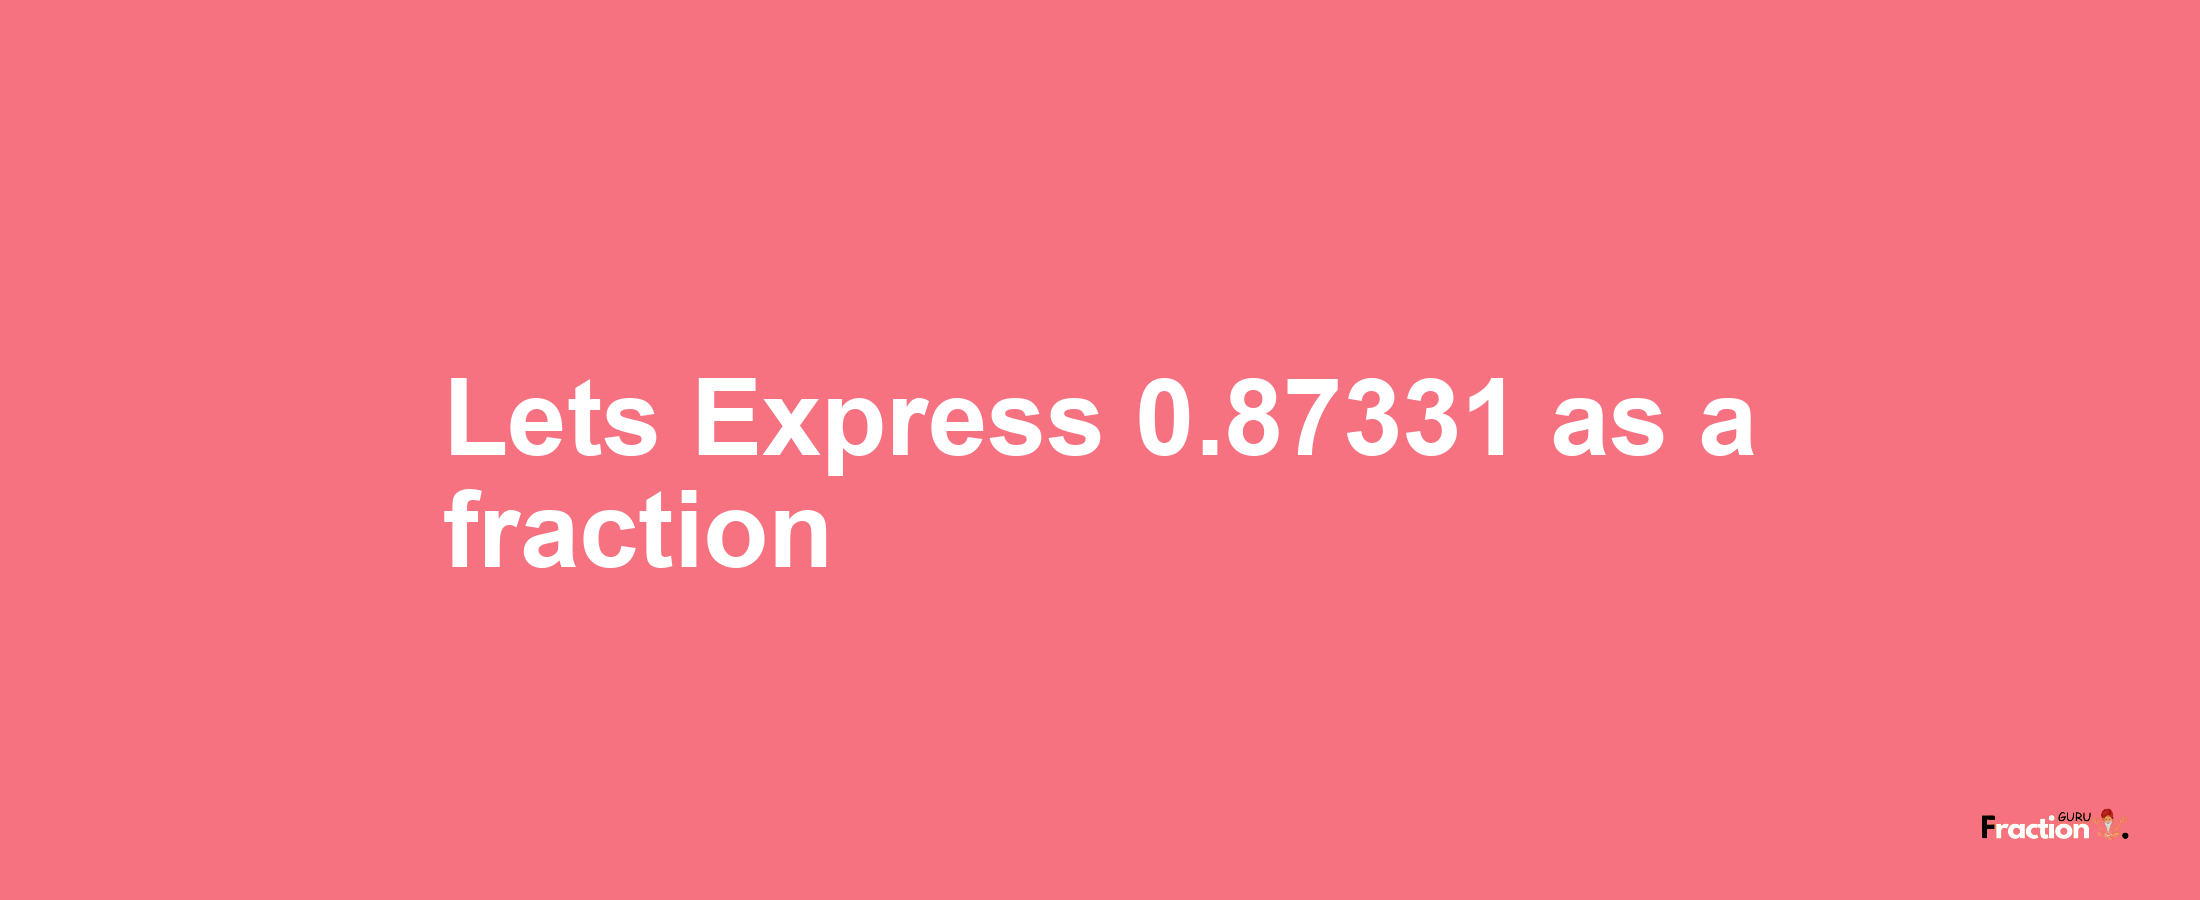 Lets Express 0.87331 as afraction